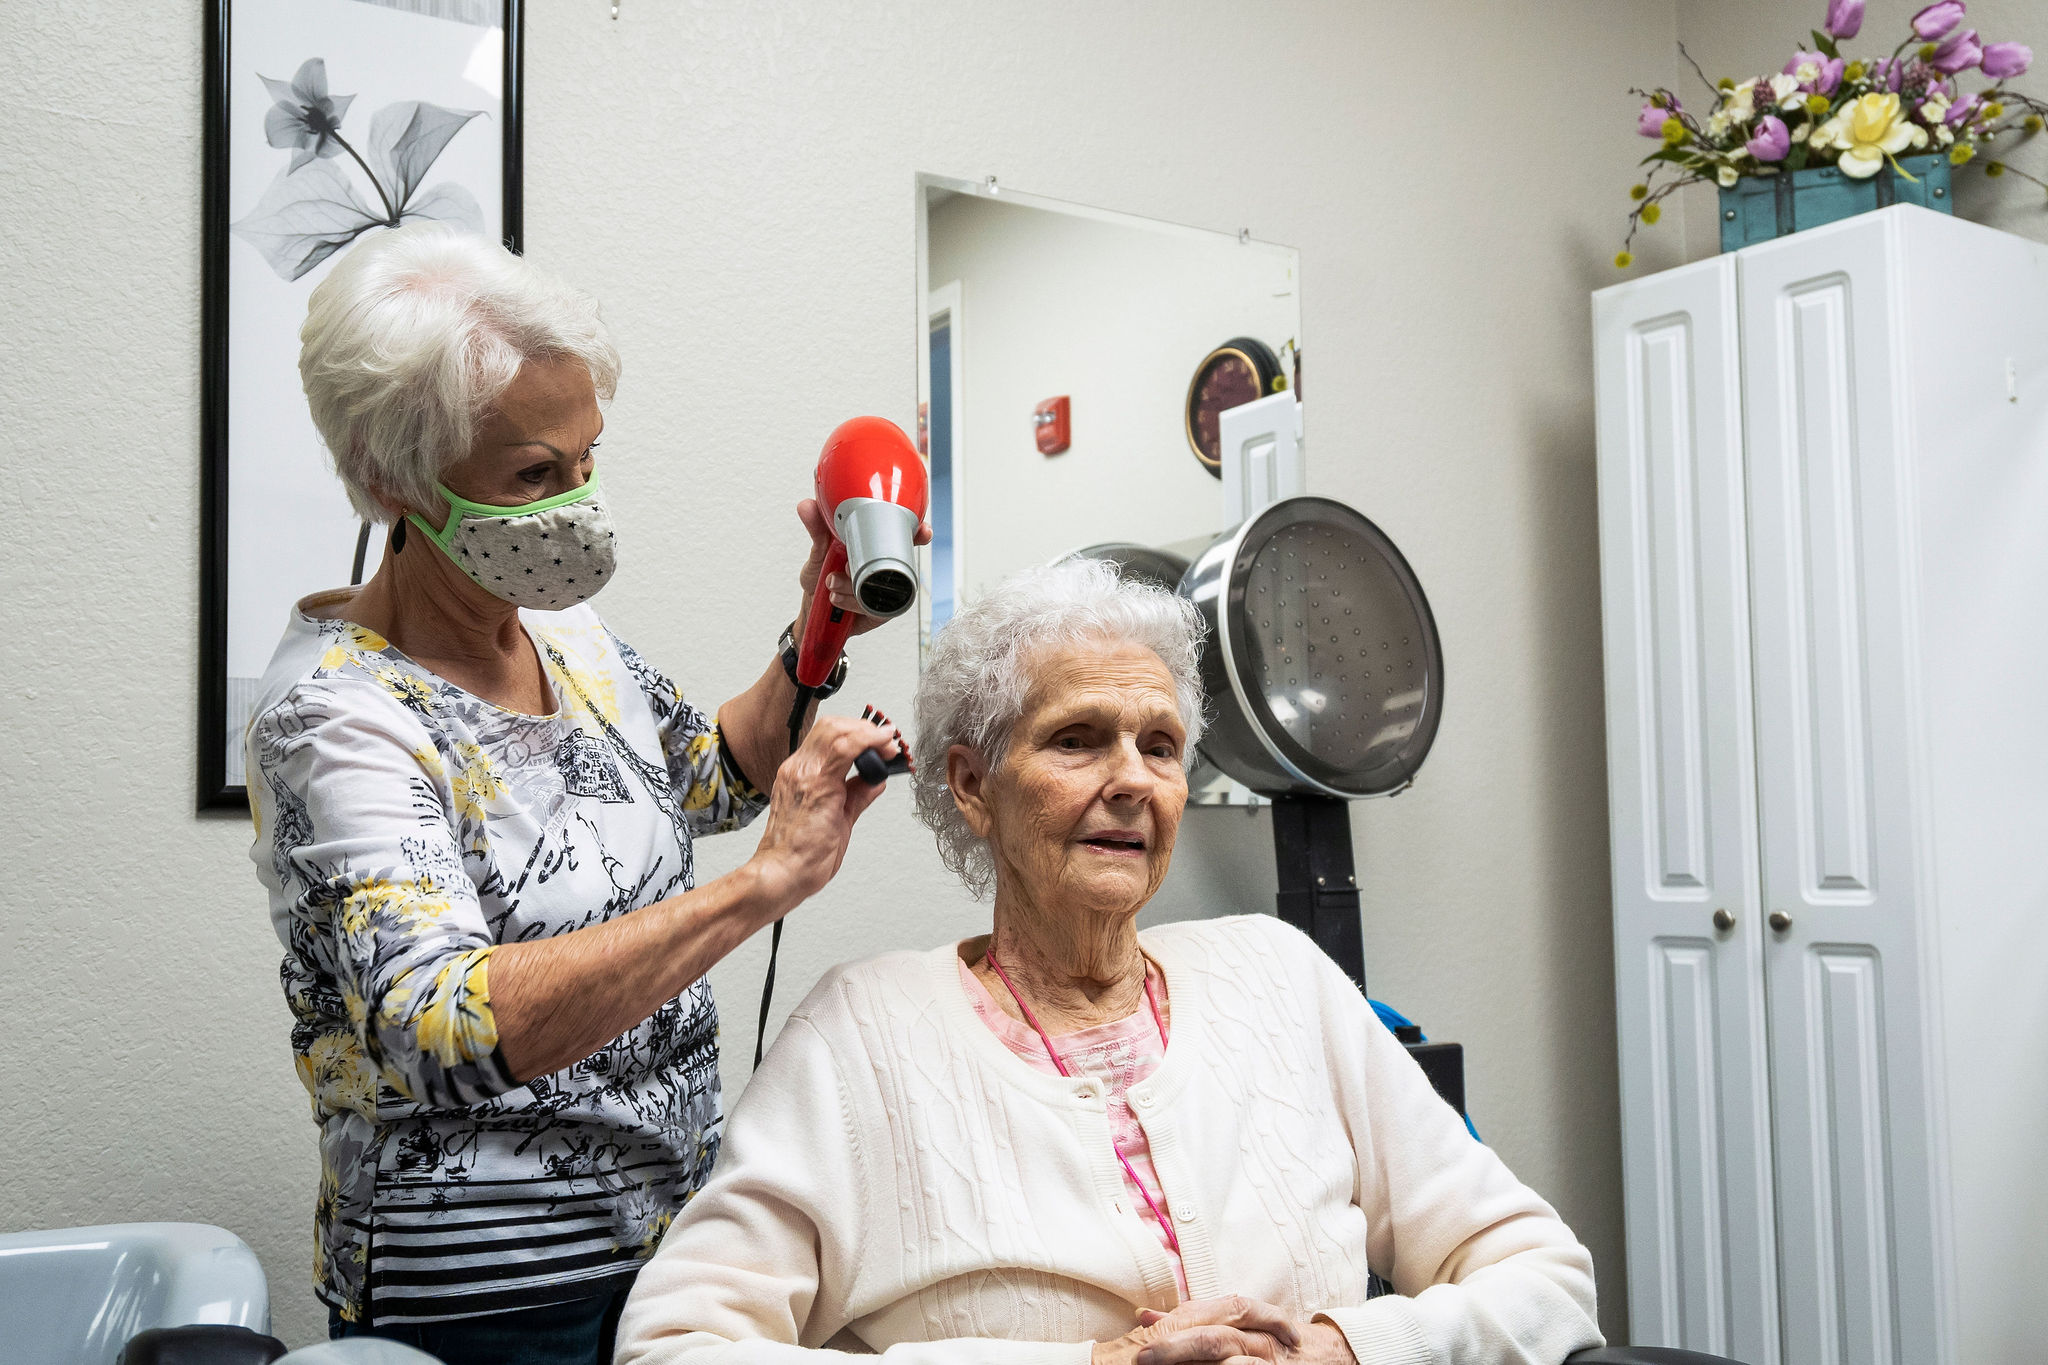 A Sundale Senior Living resident gets pampered at the on-site beauty salon